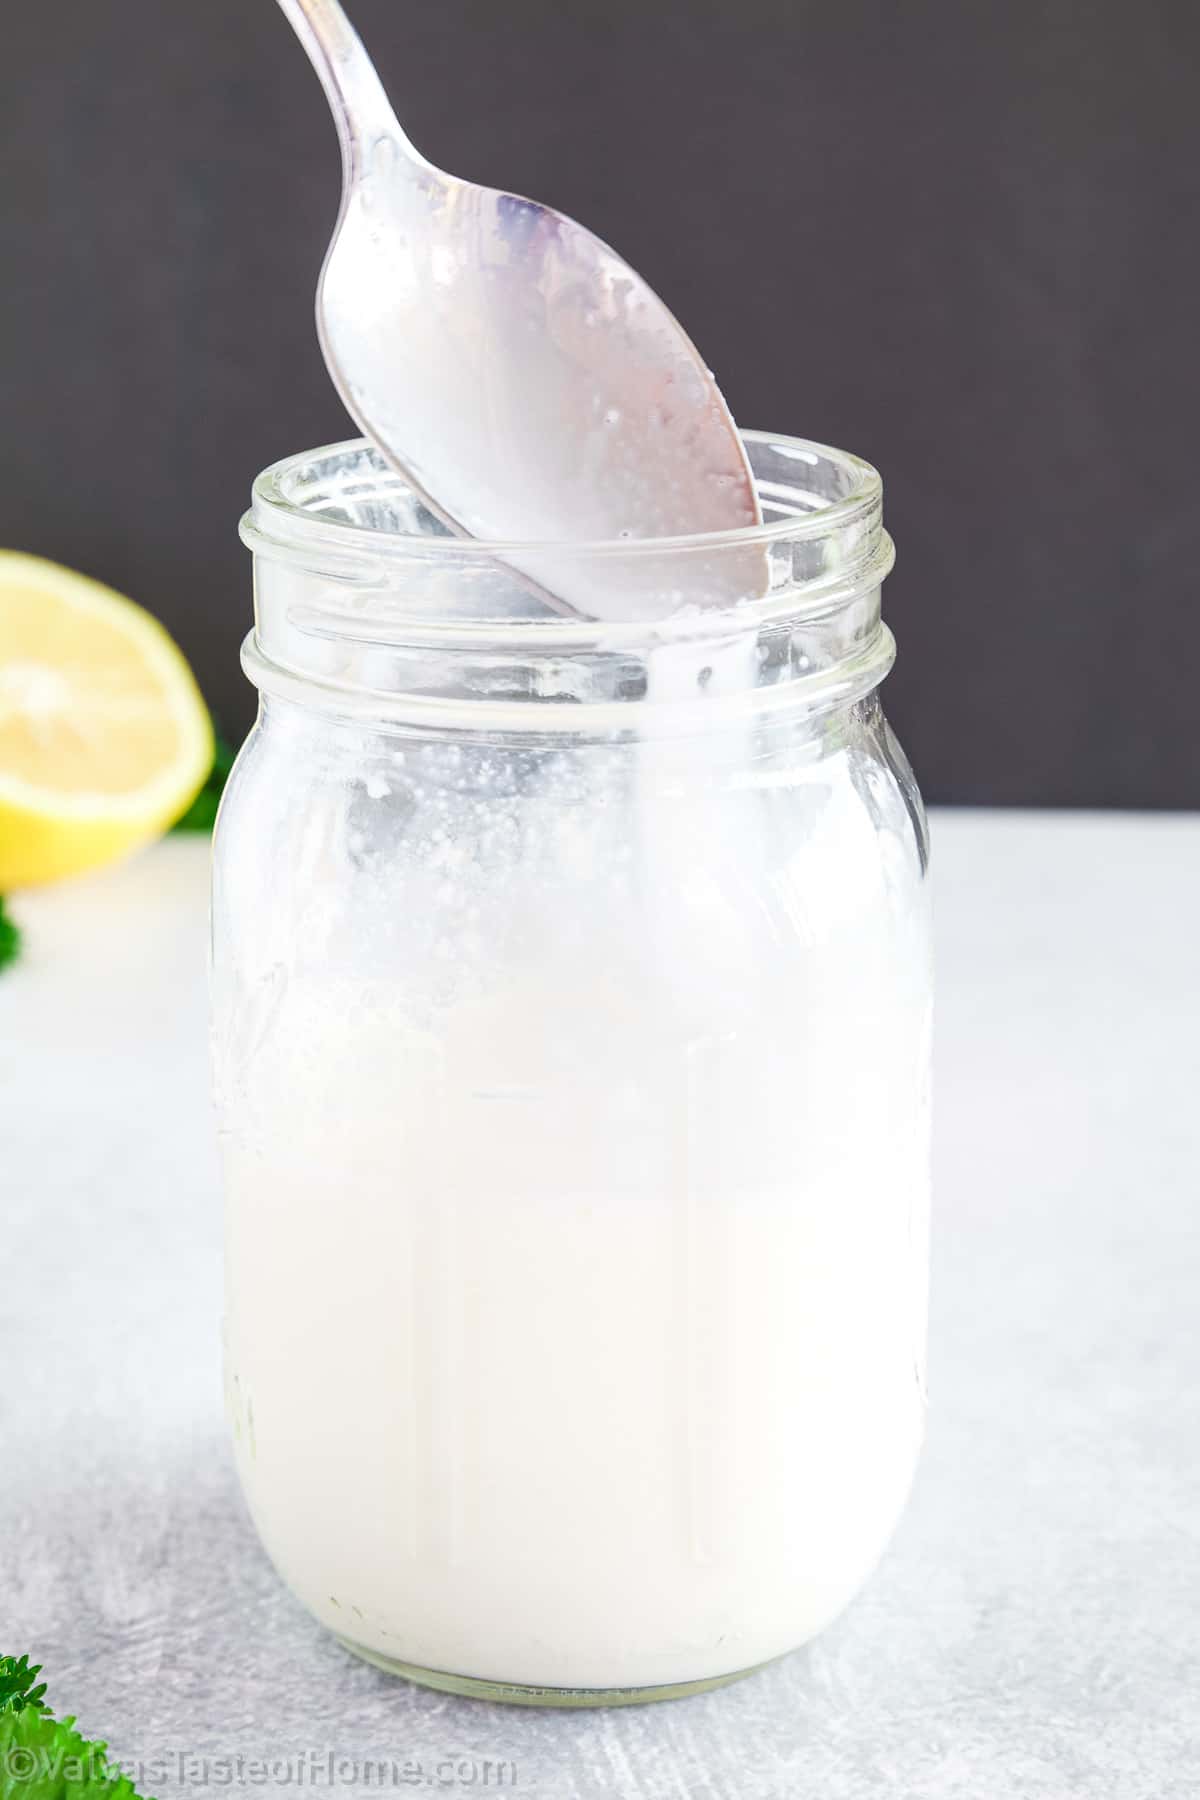 This is the best buttermilk recipe using premium grass-fed whole milk and freshly squeezed lemon juice that transforms the regular milk into a tangy delight.